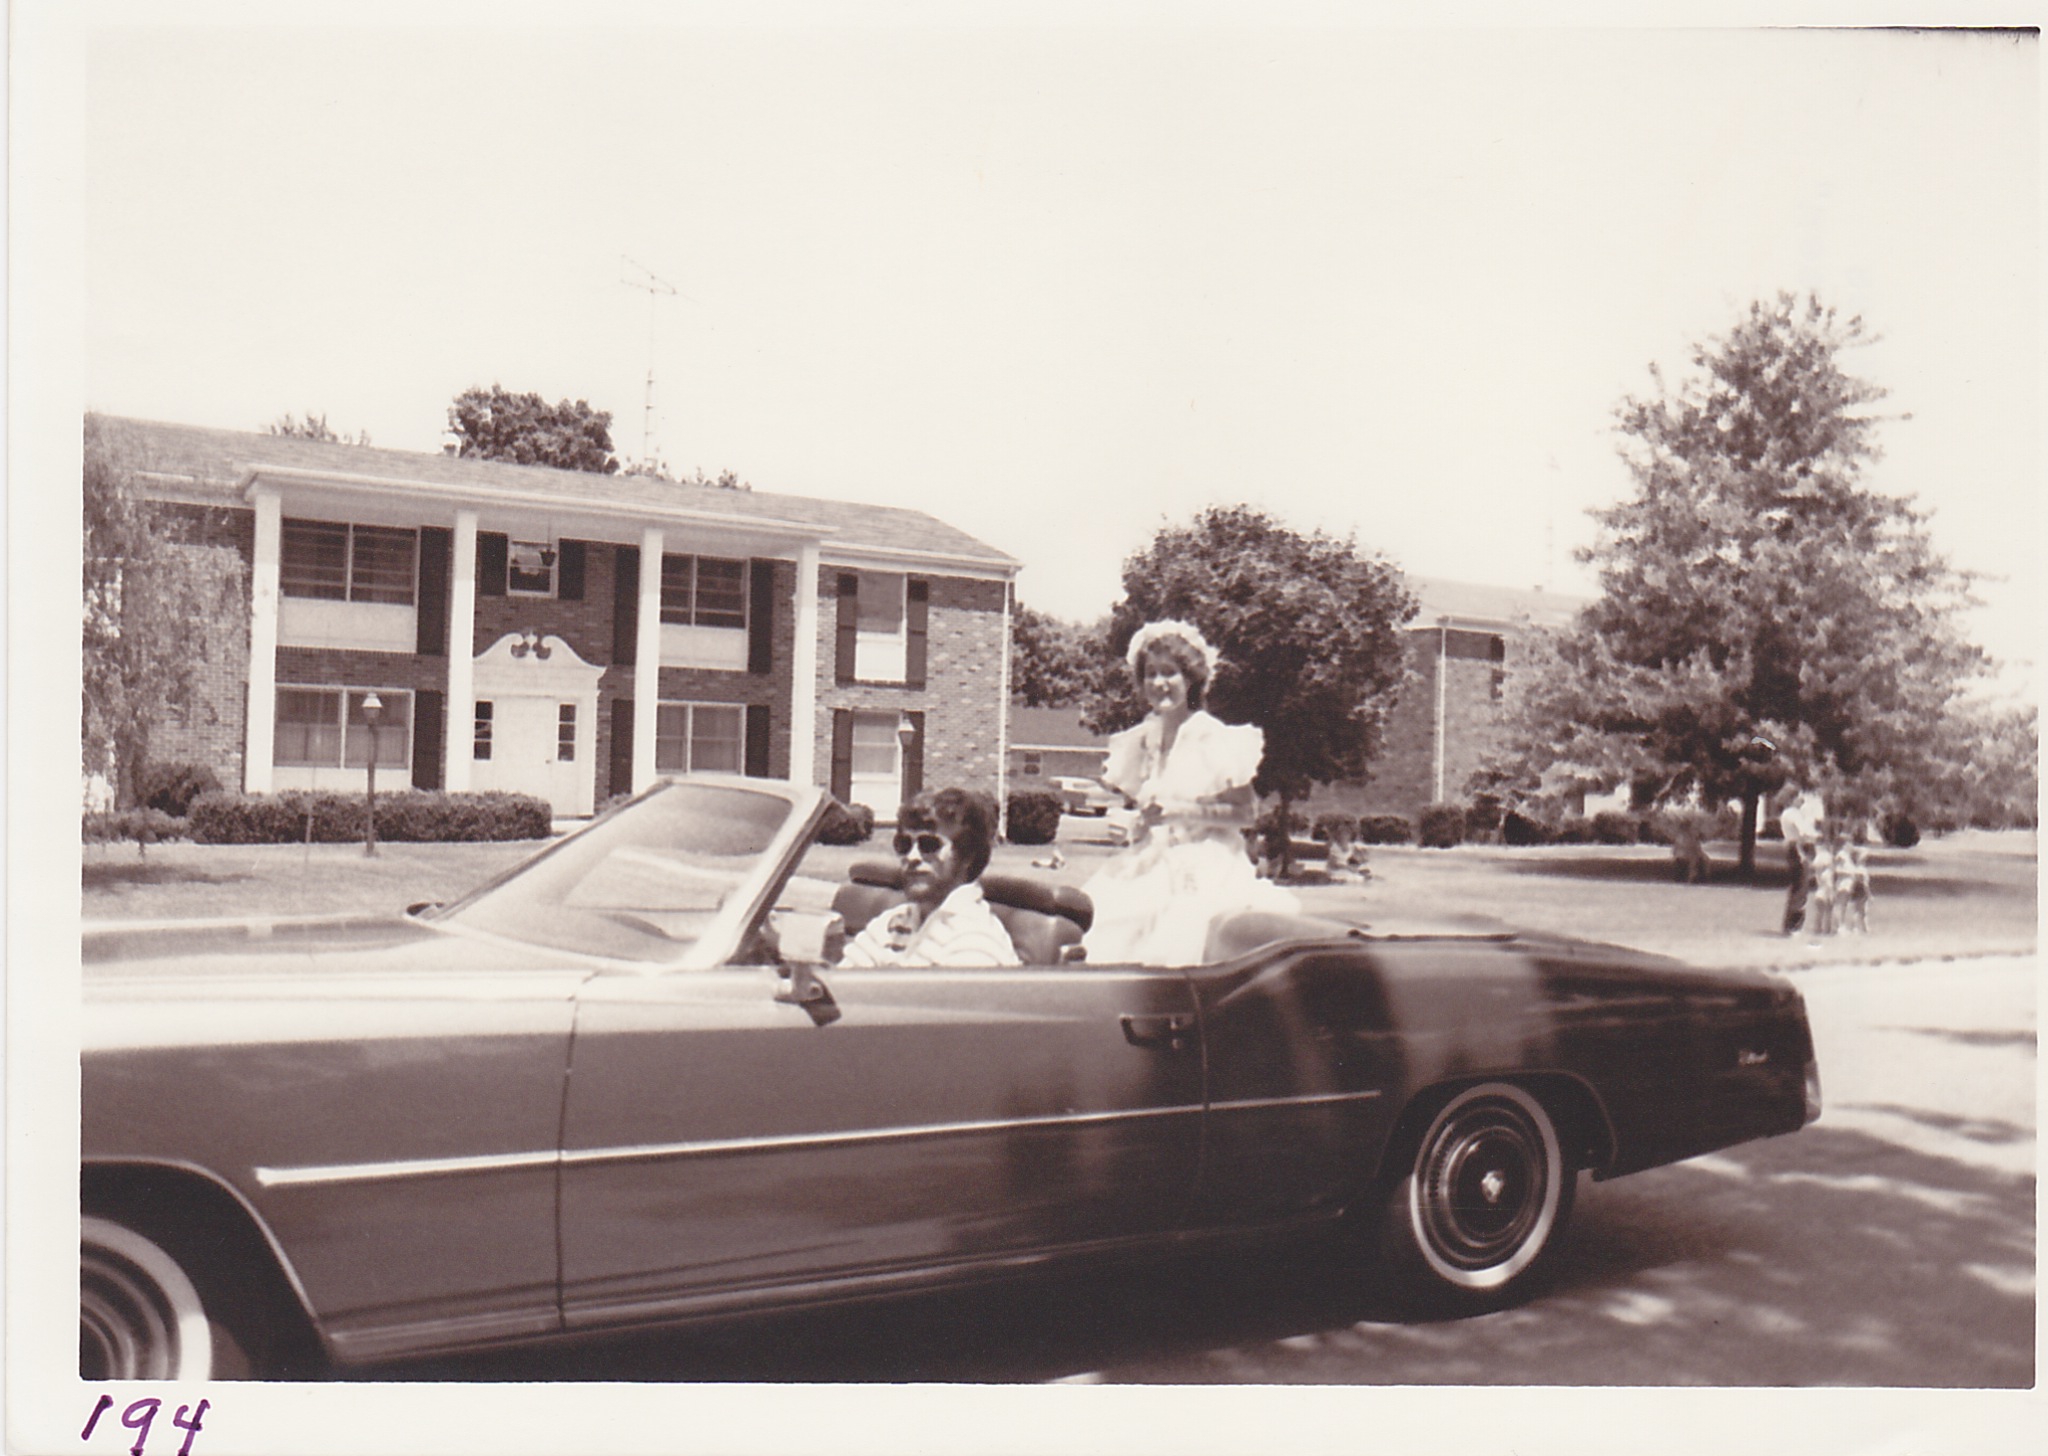 Miss Maureen Mansfield reigned as “Queen” for the sesquicentennial observance.  She is shown here during participation in the parade.  Kim Valentine serves as her vehicle driver.